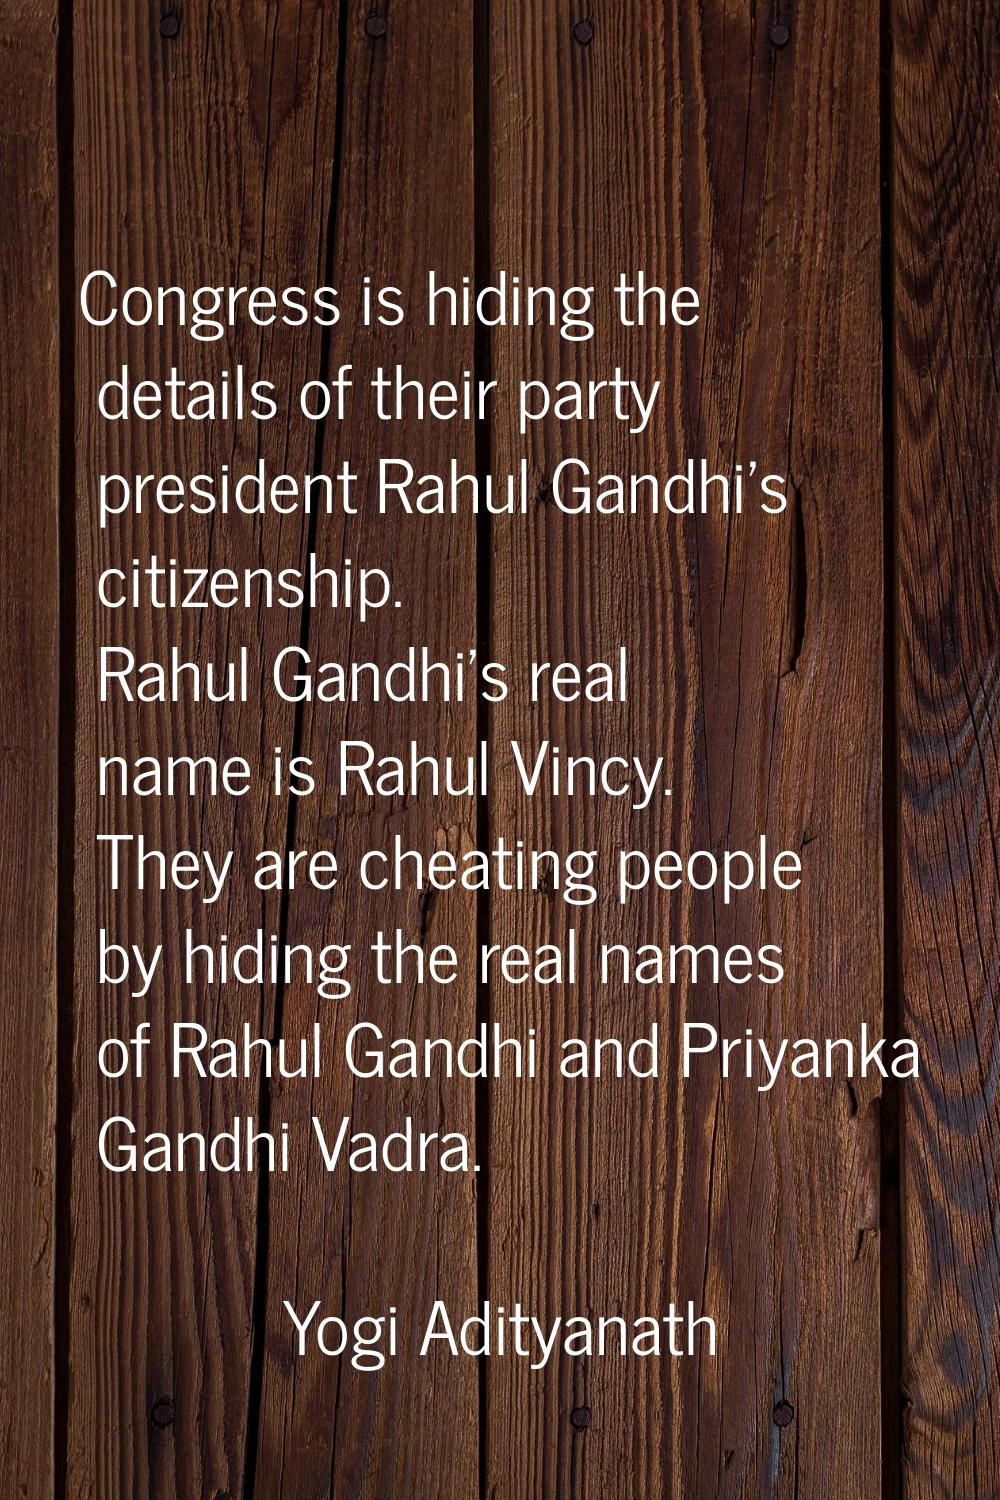 Congress is hiding the details of their party president Rahul Gandhi's citizenship. Rahul Gandhi's 